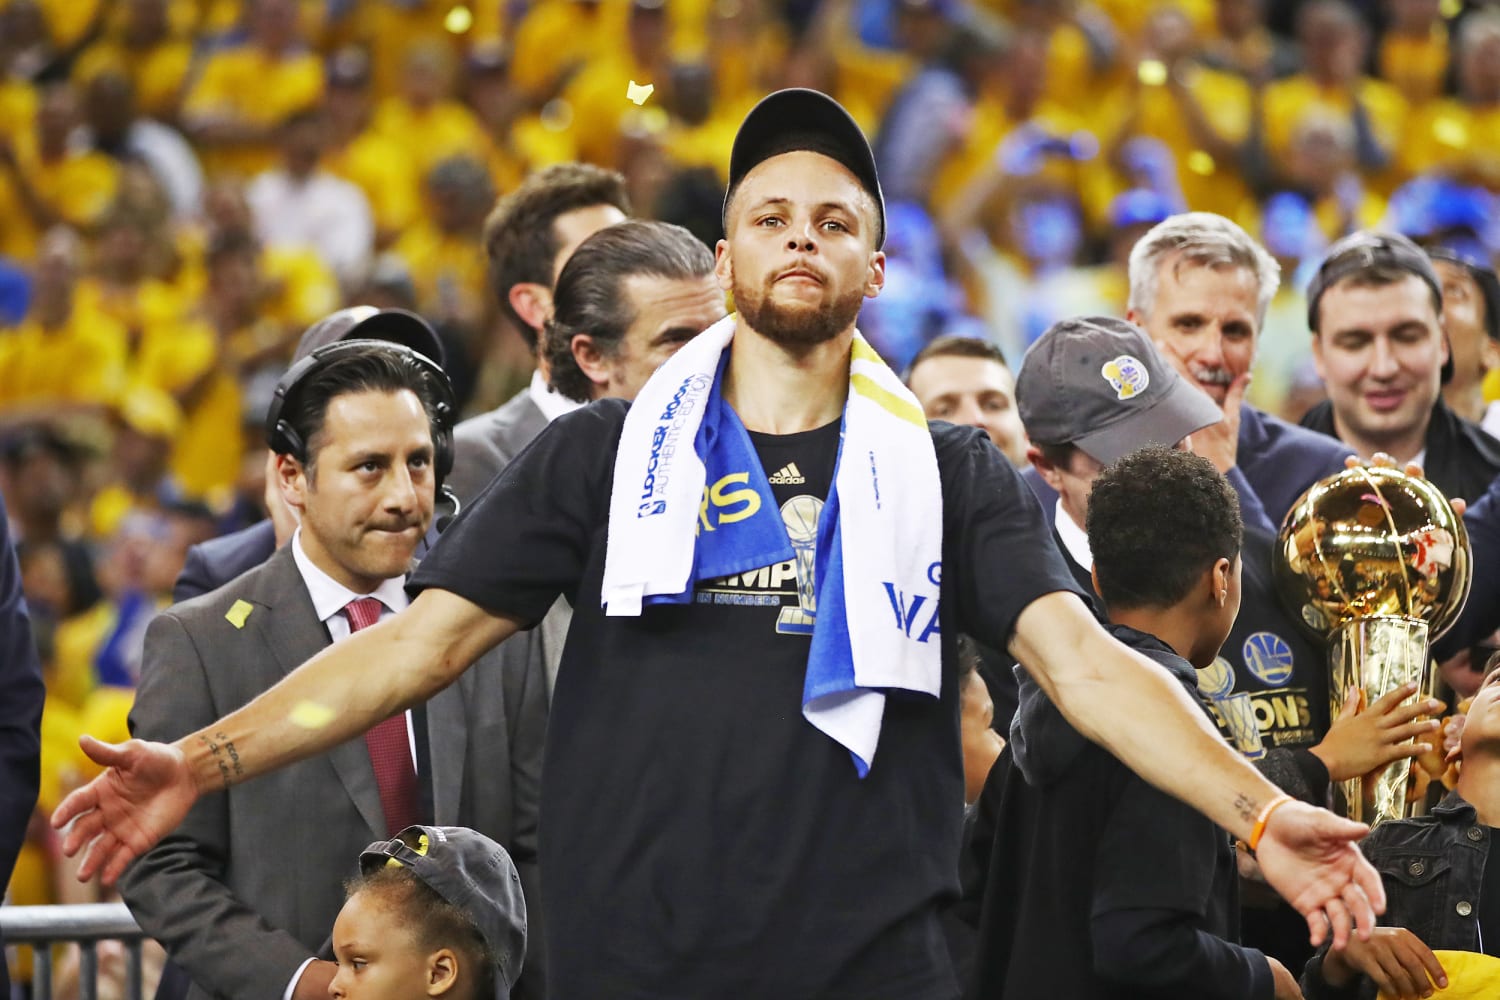 Stephen Curry not happy with reporter's question about winning Finals MVP,  not about Warriors as a team 